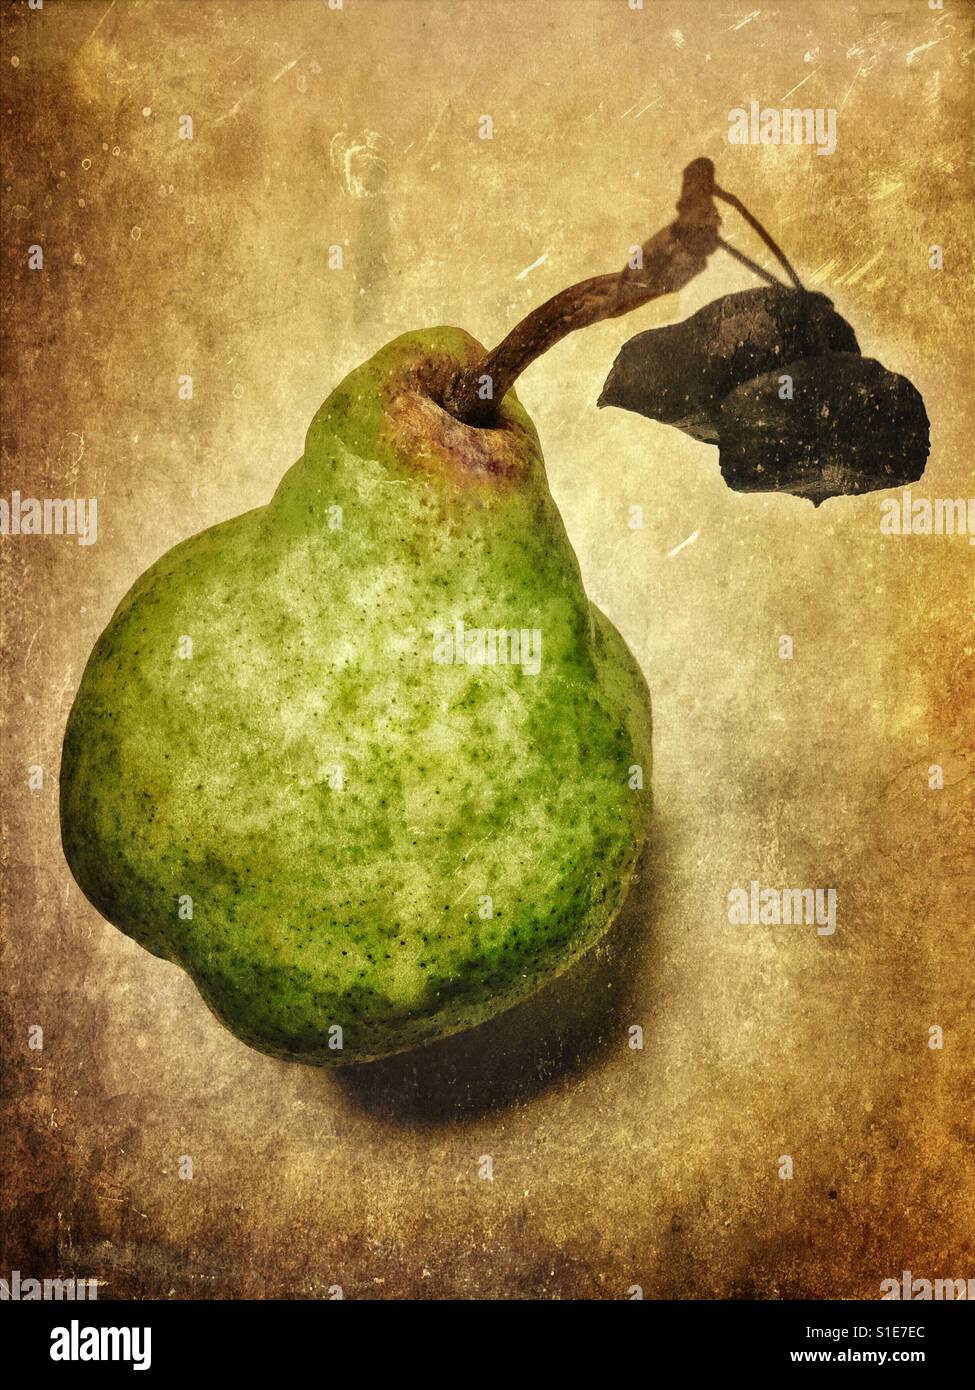 A pear with leaves against a textured background. Stock Photo